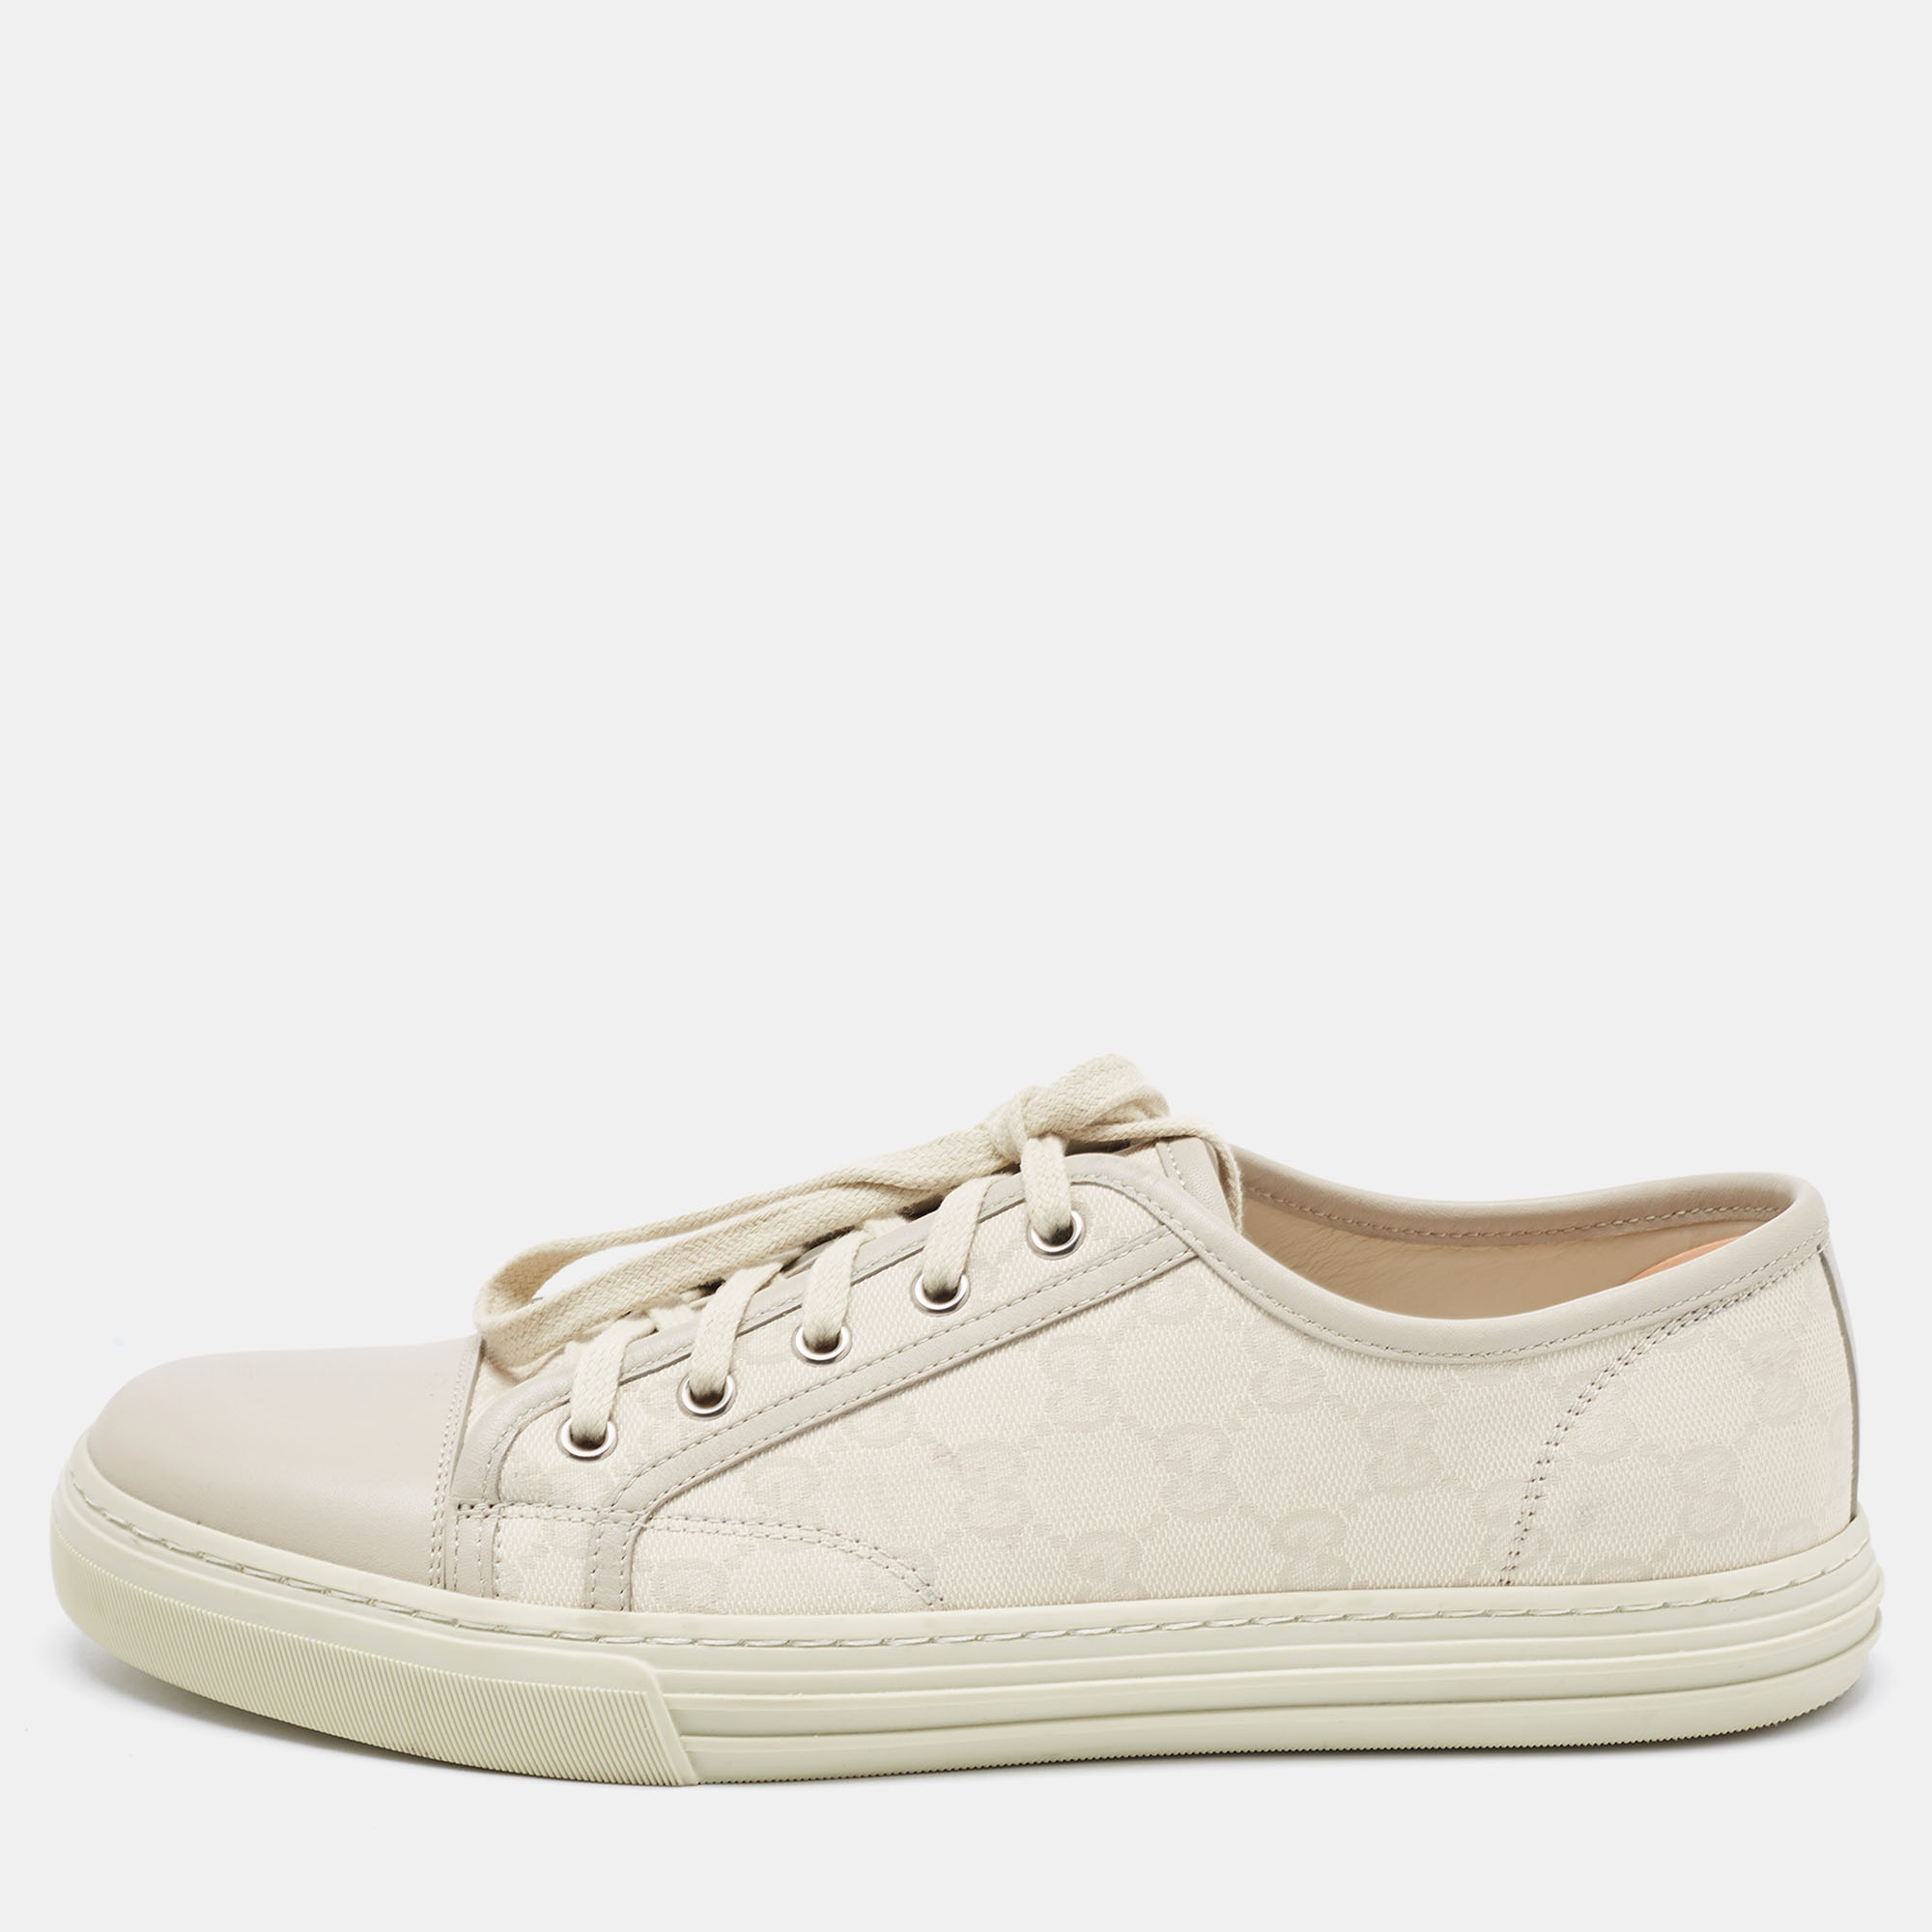 Gucci Two Tone GG Canvas And Leather Cap Toe Low Top Sneakers Size 42